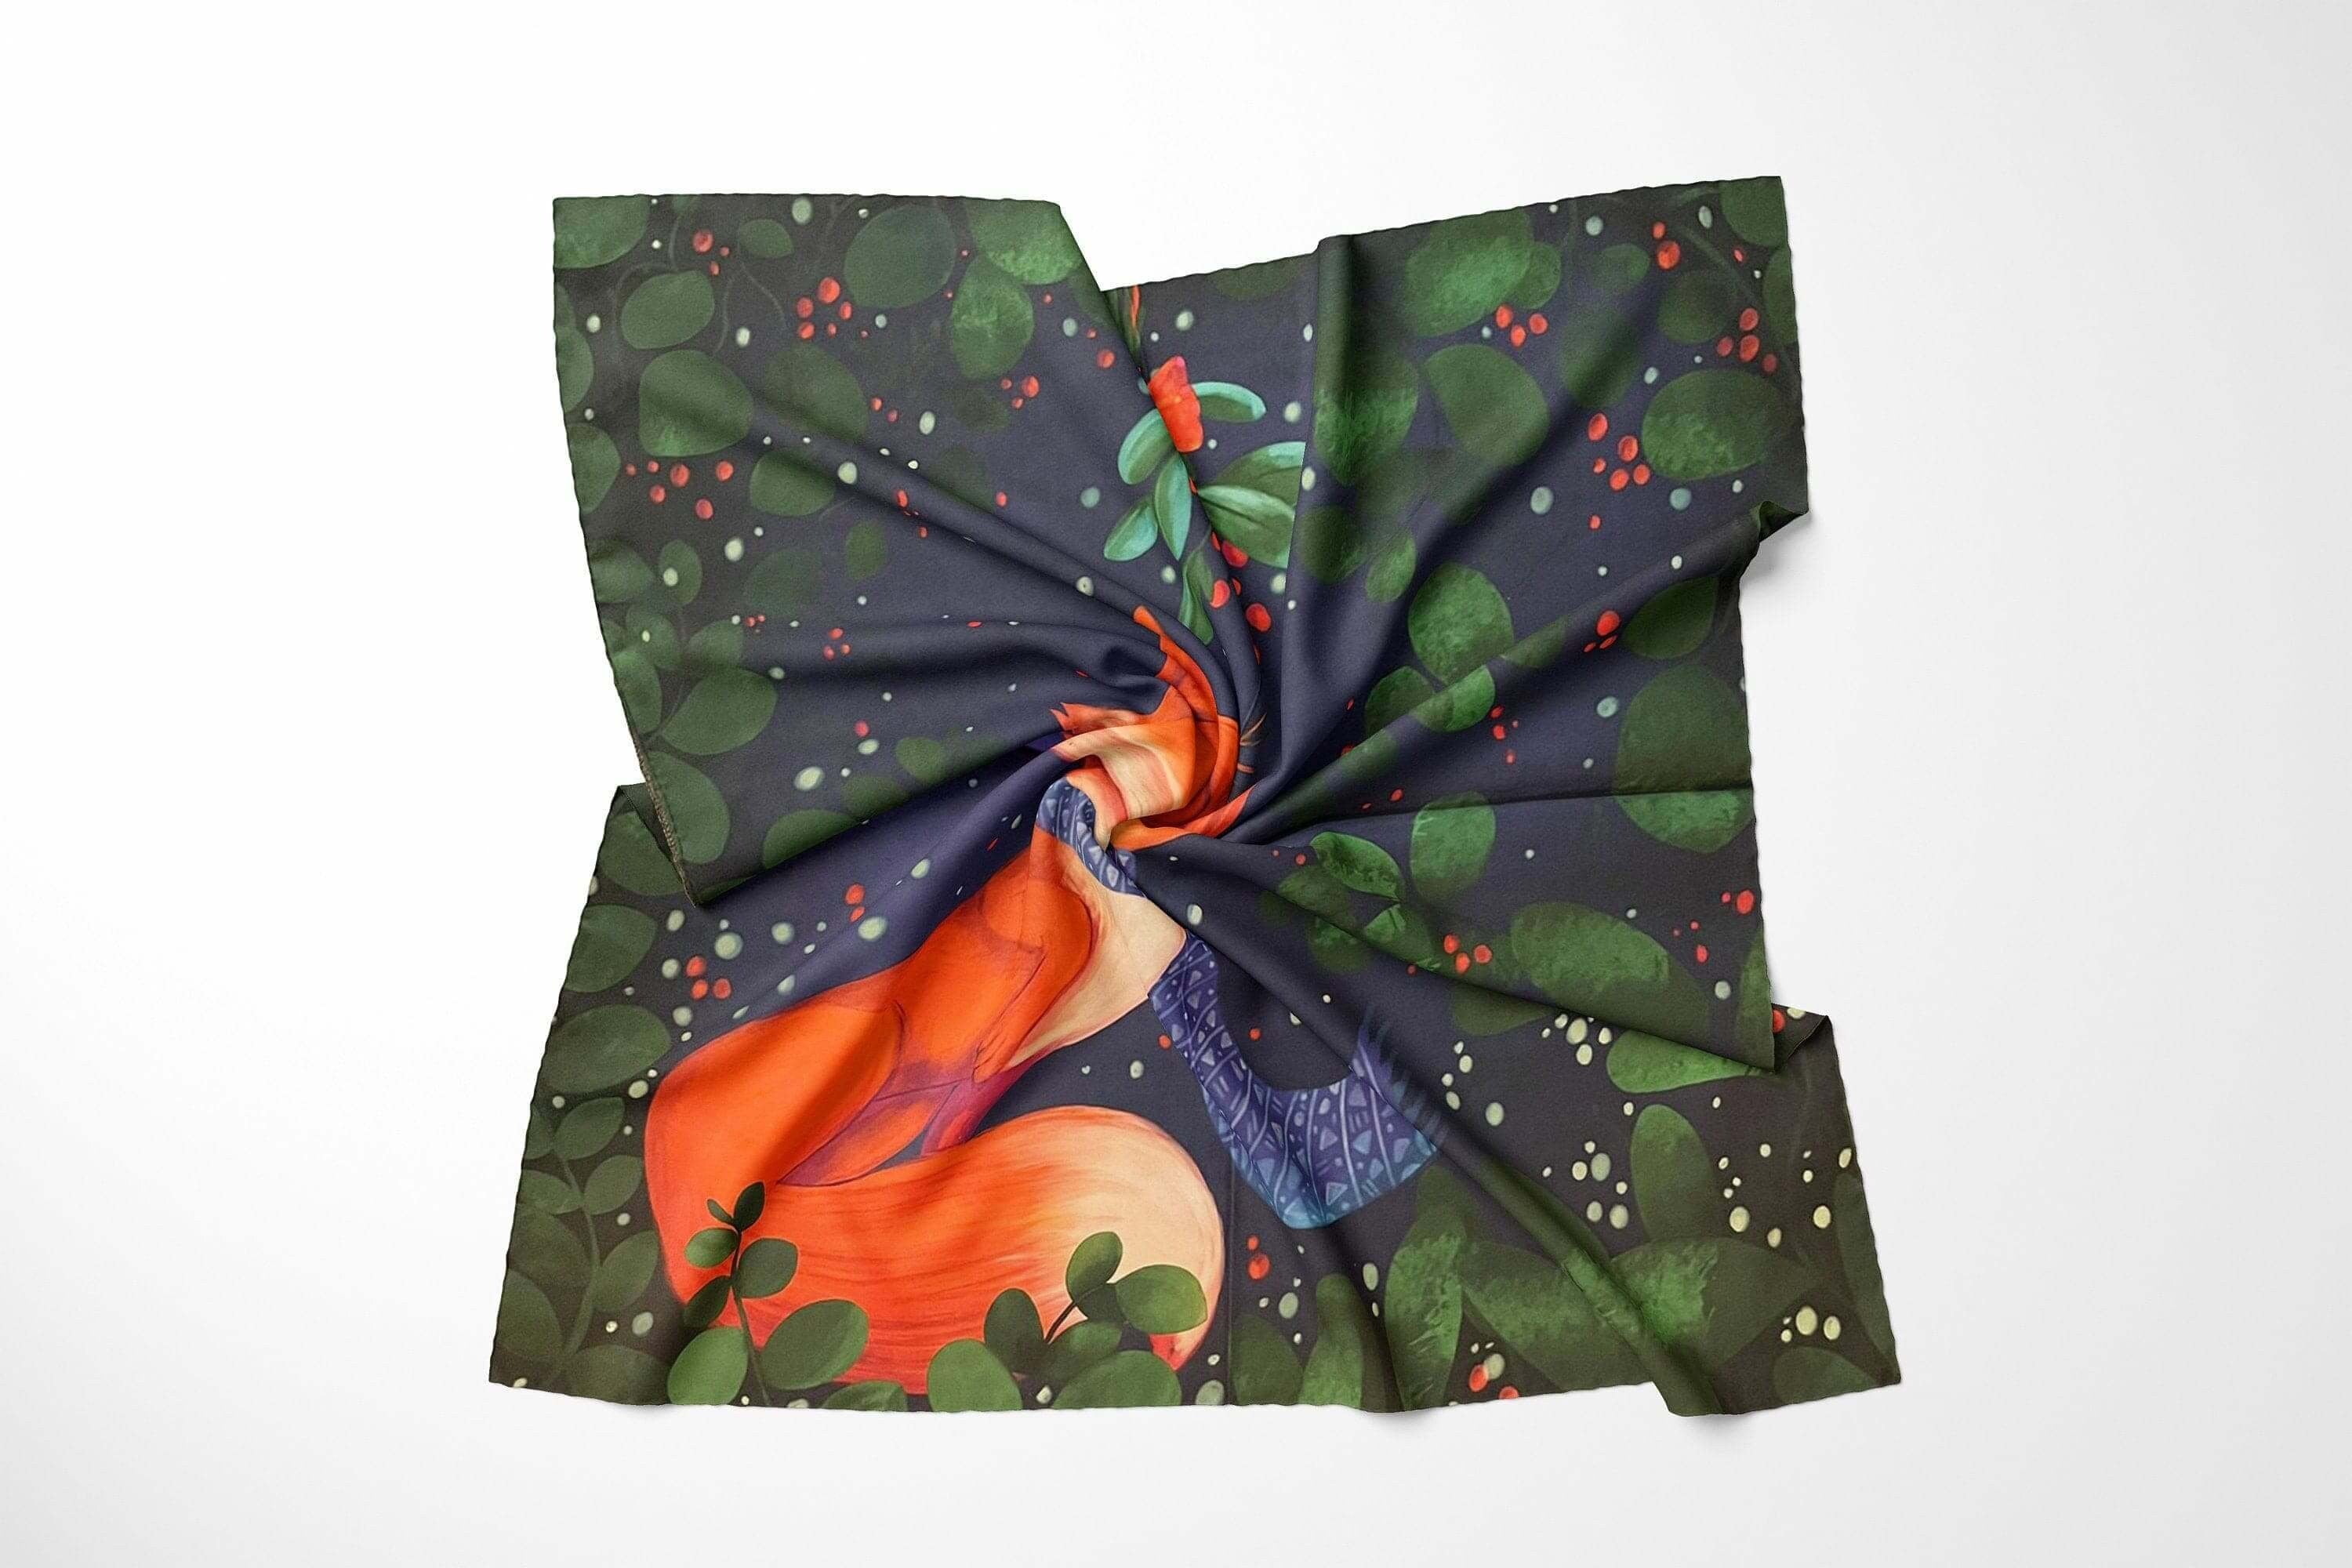 Accessorize your outfit this season with our headscarf. Featuring a versatile design that can be worn in a variety of ways, this headscarf is the perfect addition to any outfit.